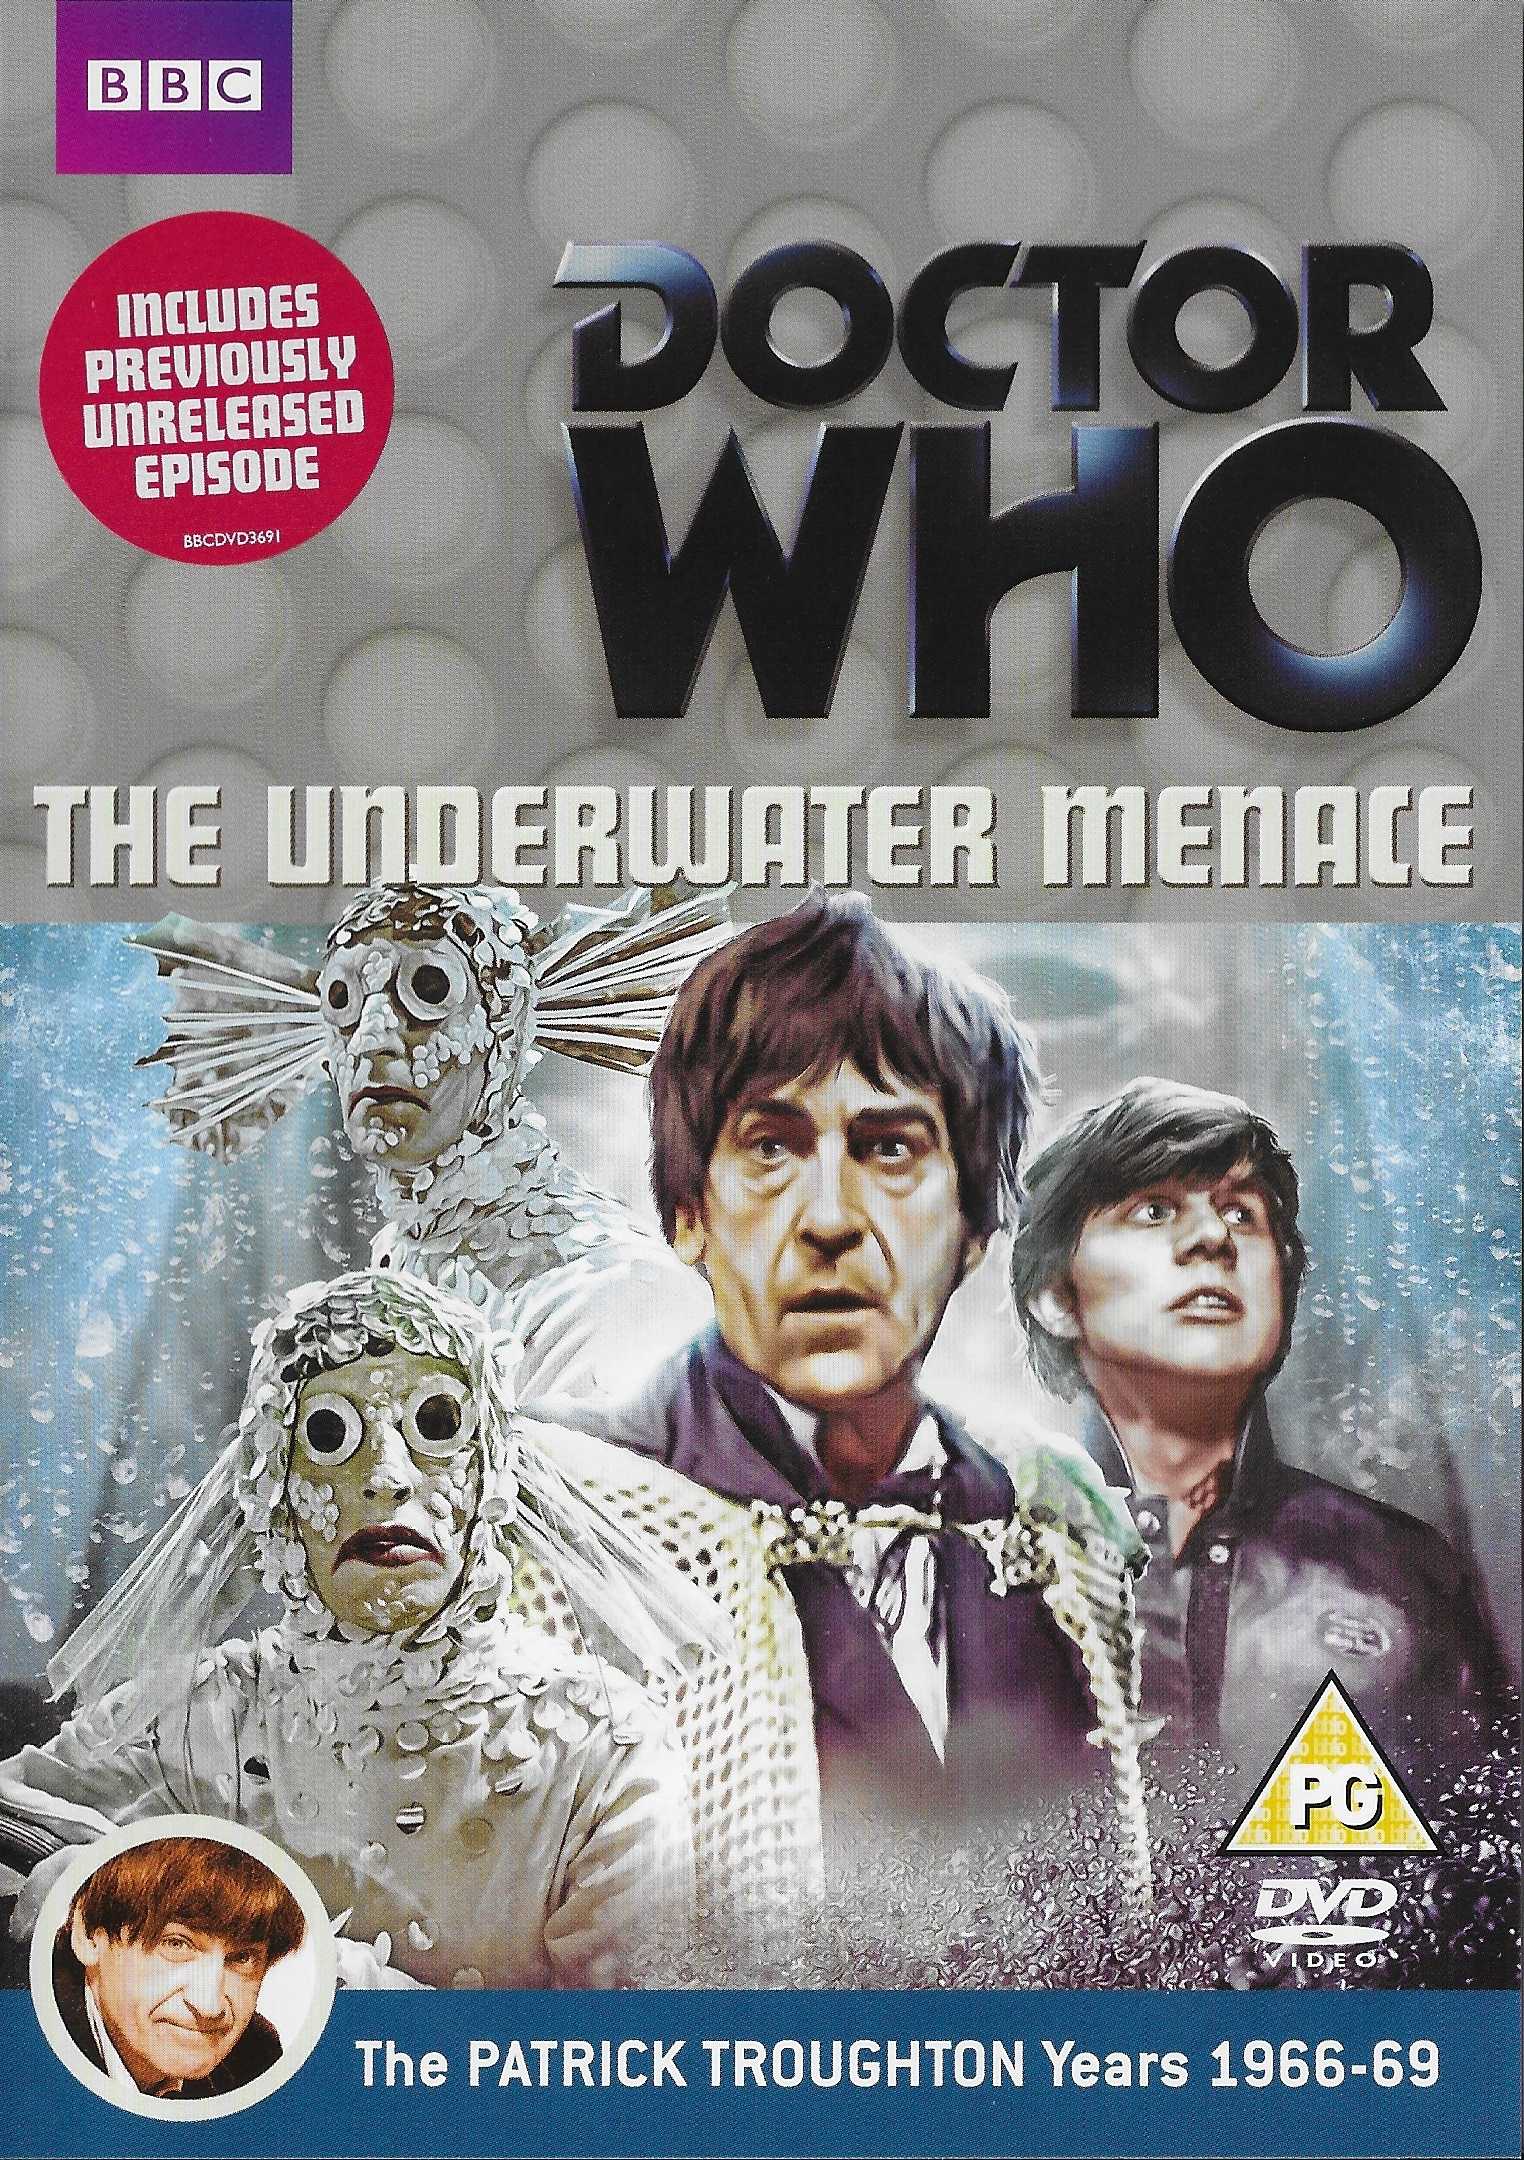 Picture of BBCDVD 3691 Doctor Who - The underwater menace DVD by artist Geoffrey Orme from the BBC records and Tapes library